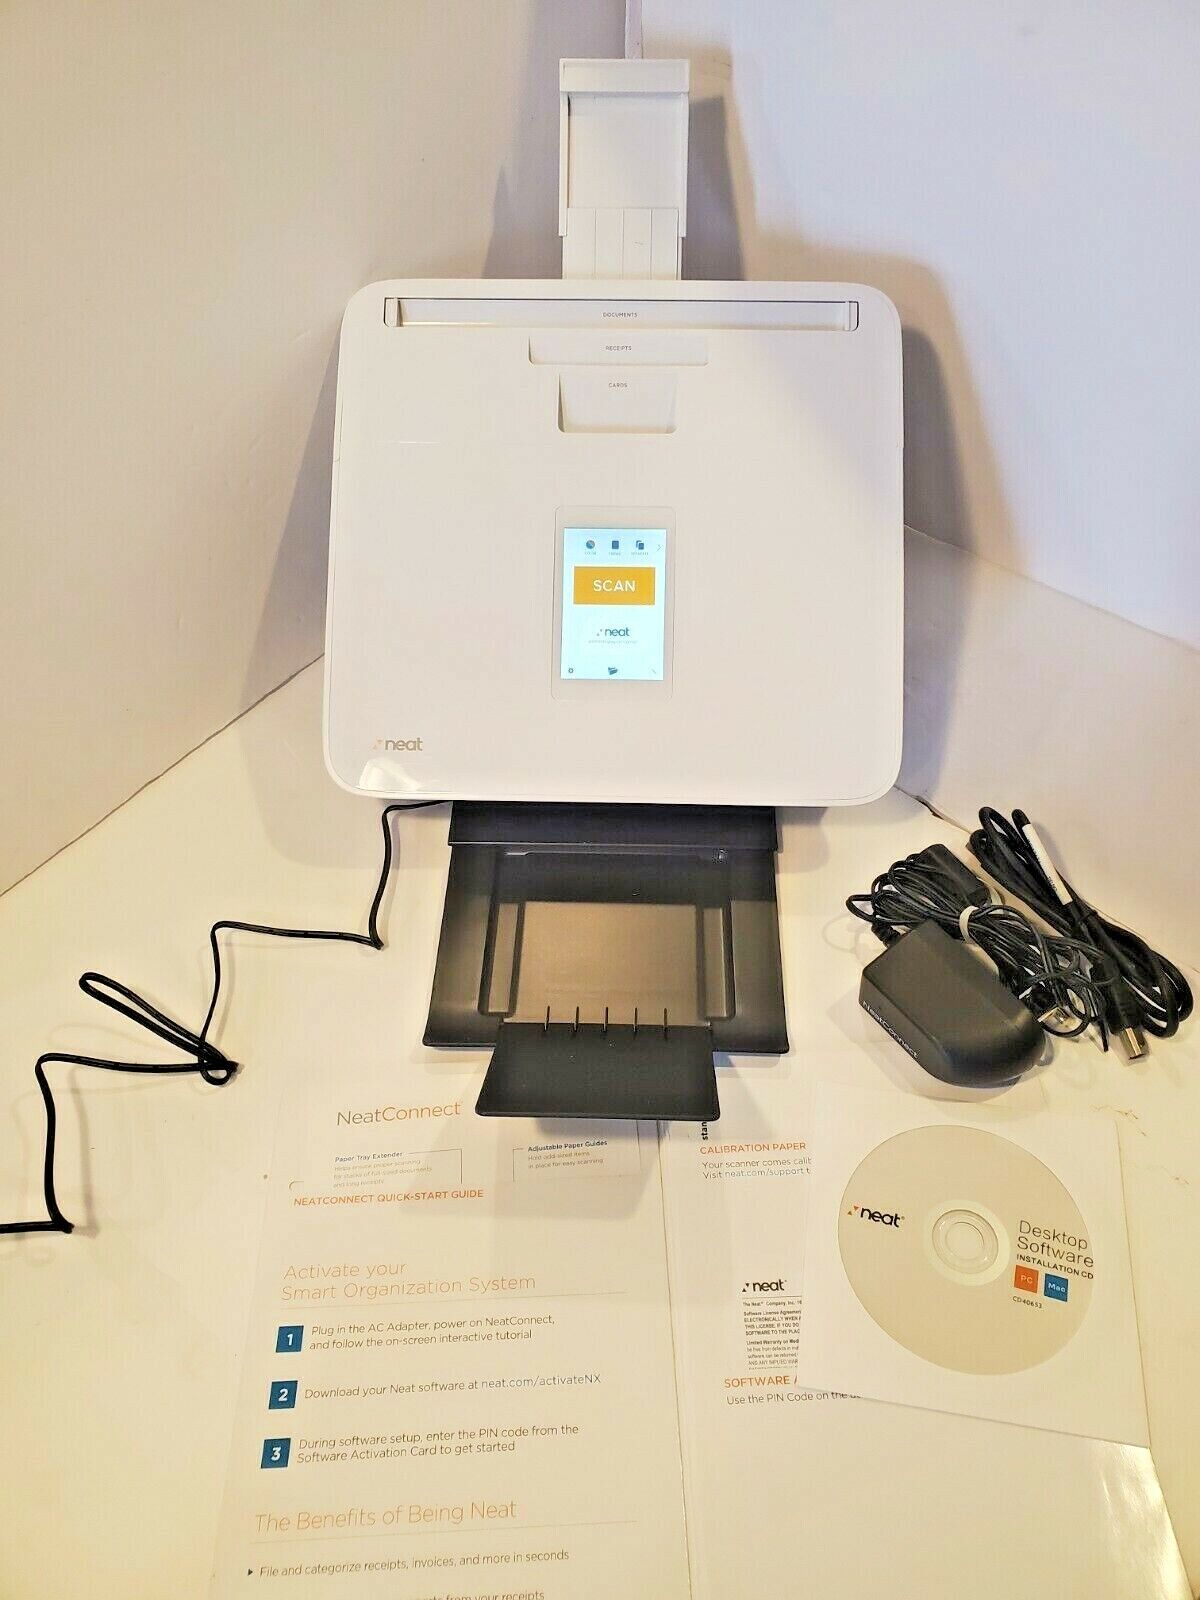 (Over 280 sold) Neat Connect NC-1000 Scanner (Upgraded after Neat Desk ND-1000)